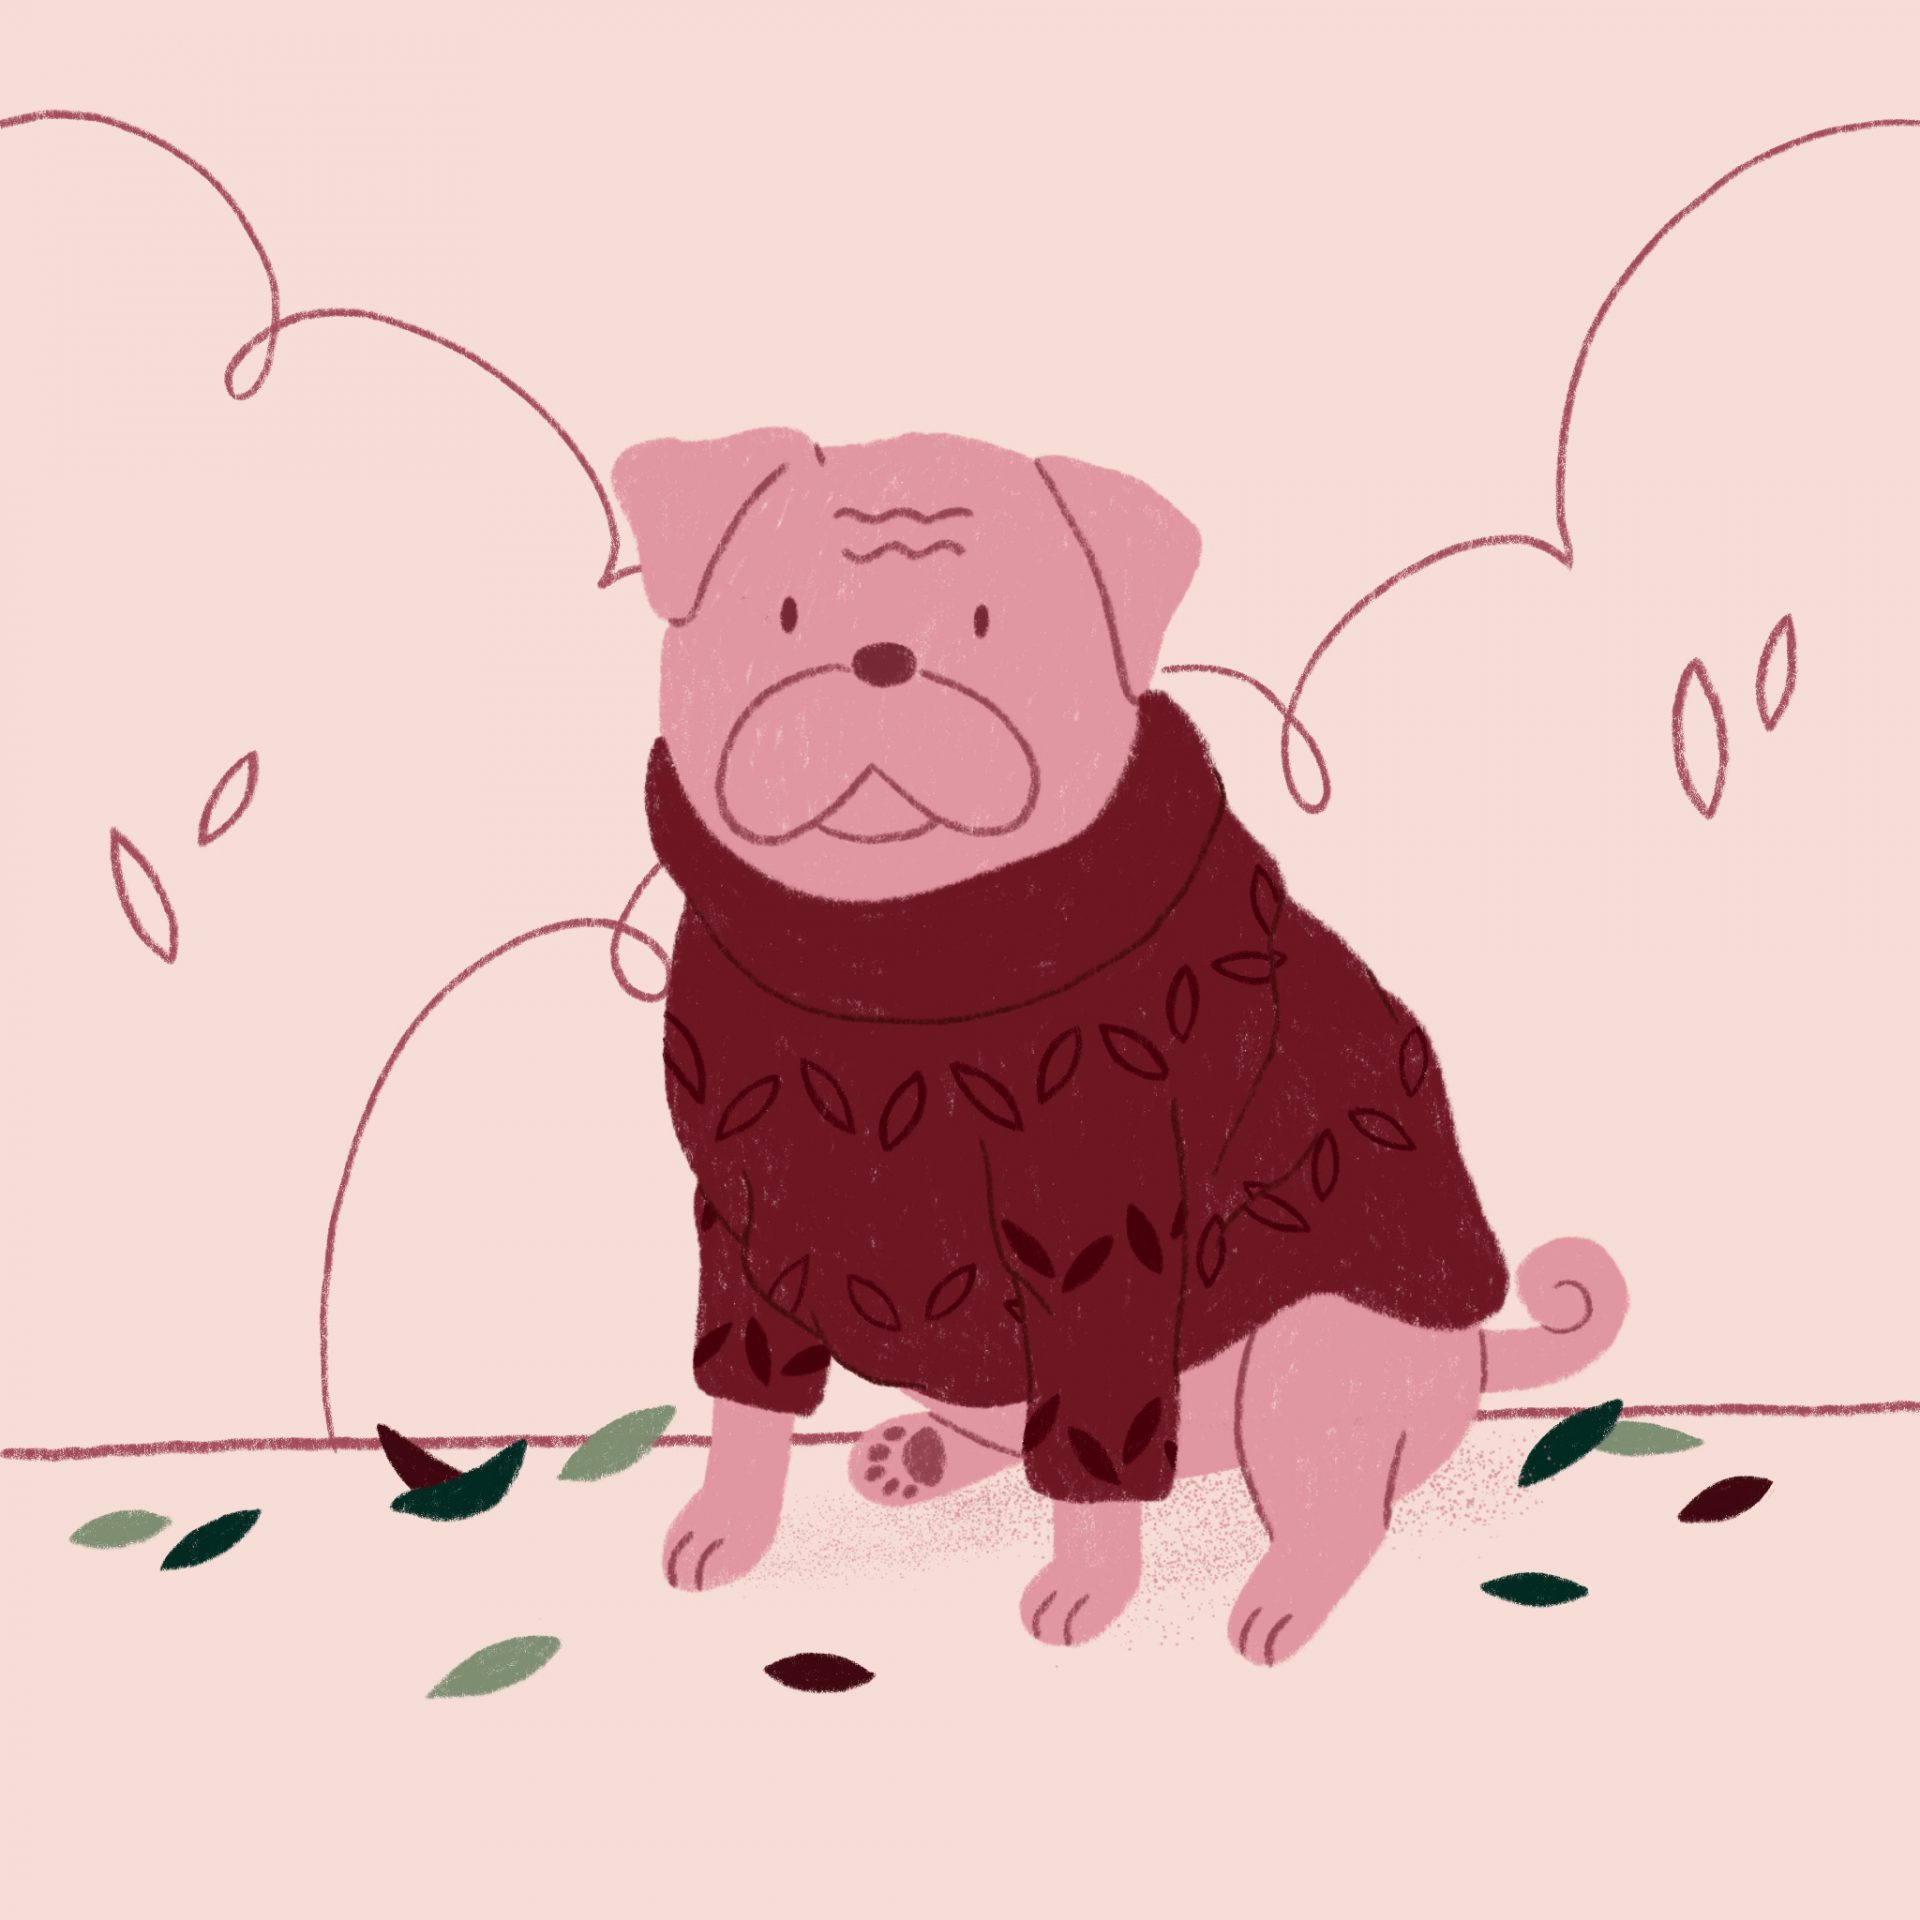 An illustration of a pug wearing a sweater